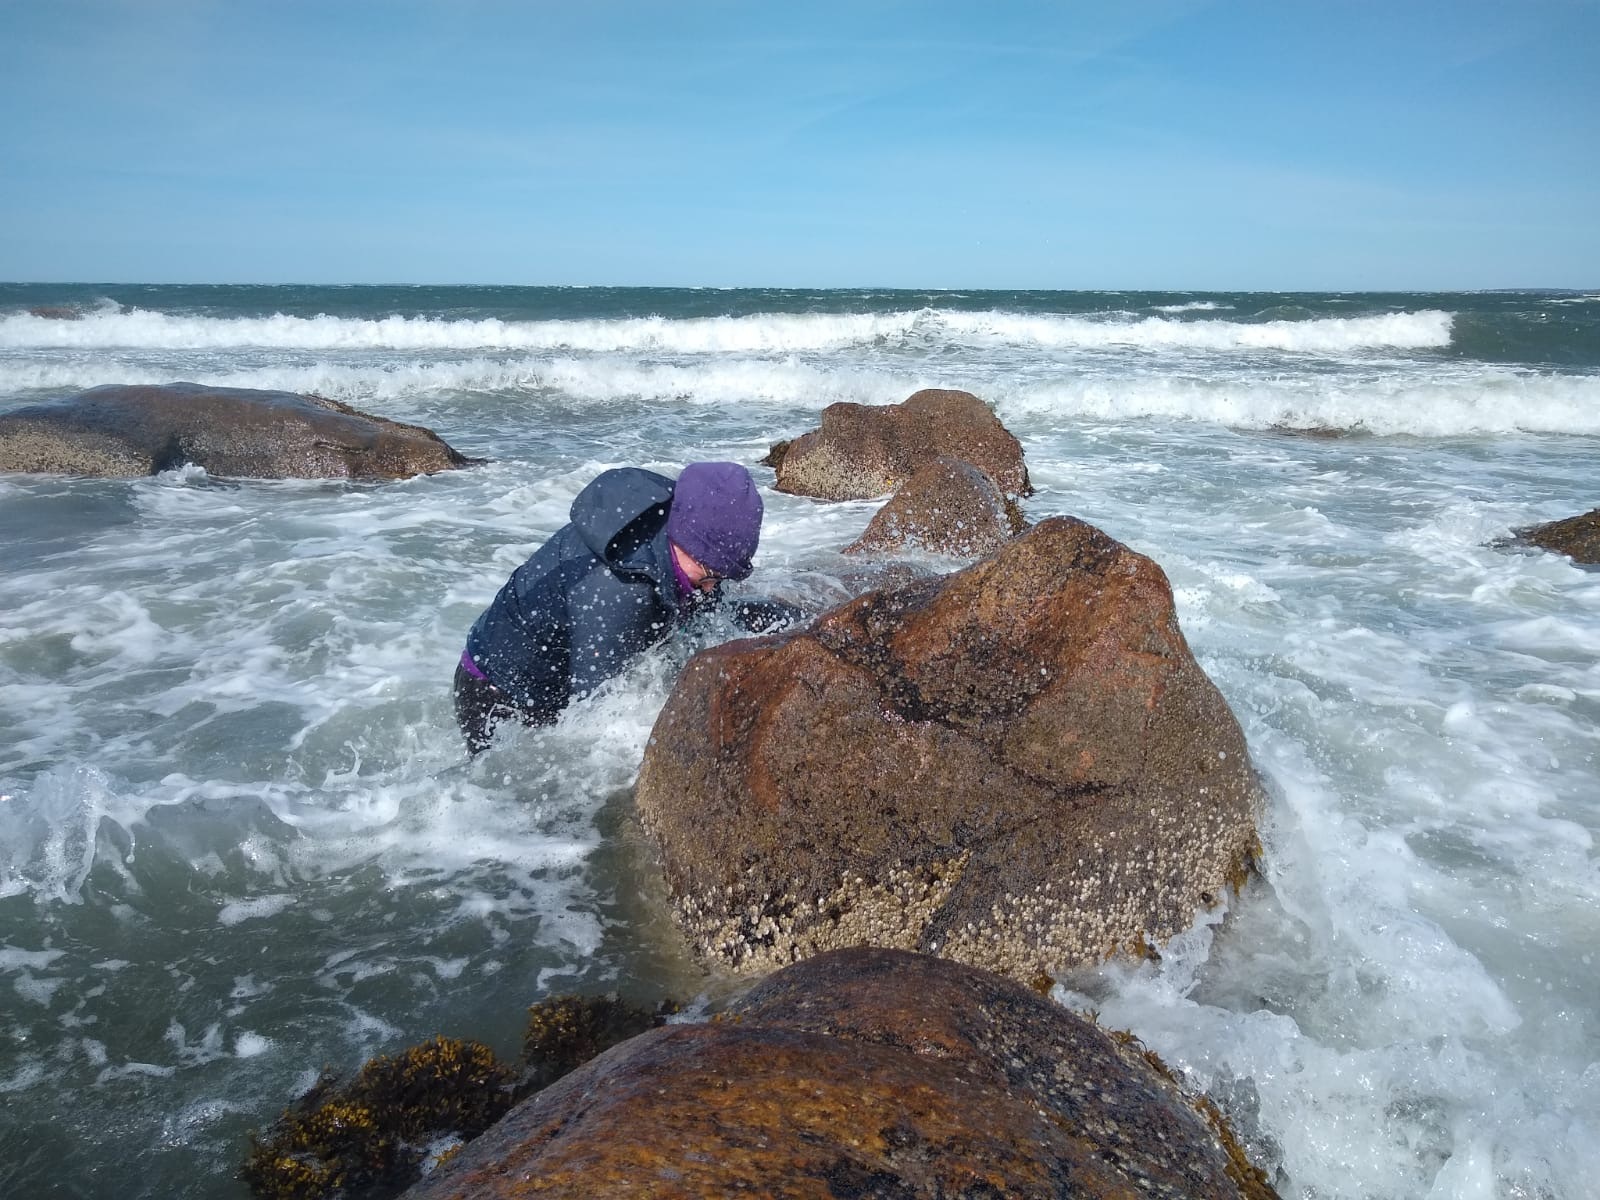 Jane Weinstock in Woods Hole, MA measuring intertidal barnacle settlement on a particularly windy day in March.